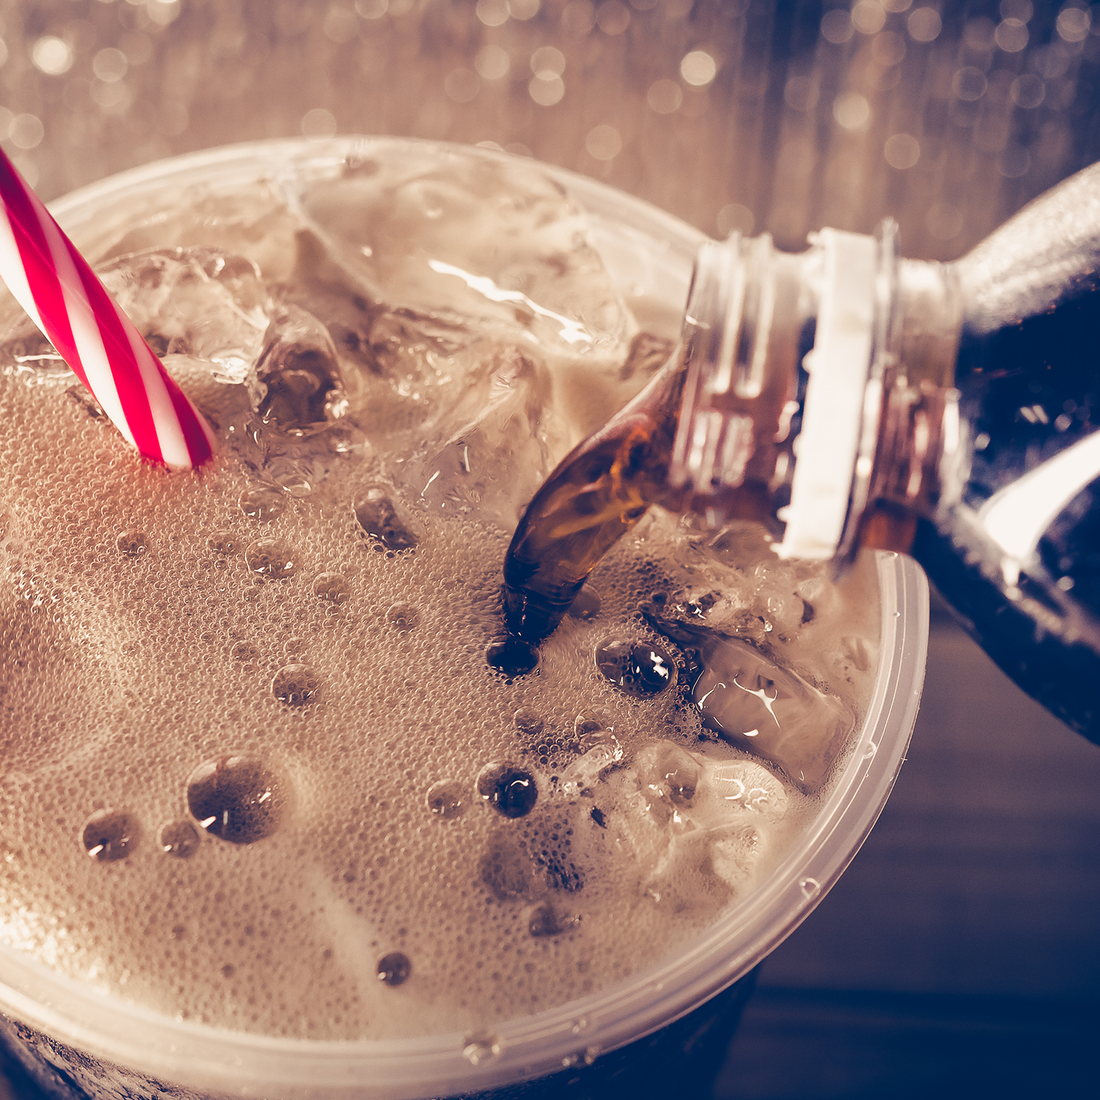 Is my diet soda slowing my weight loss?